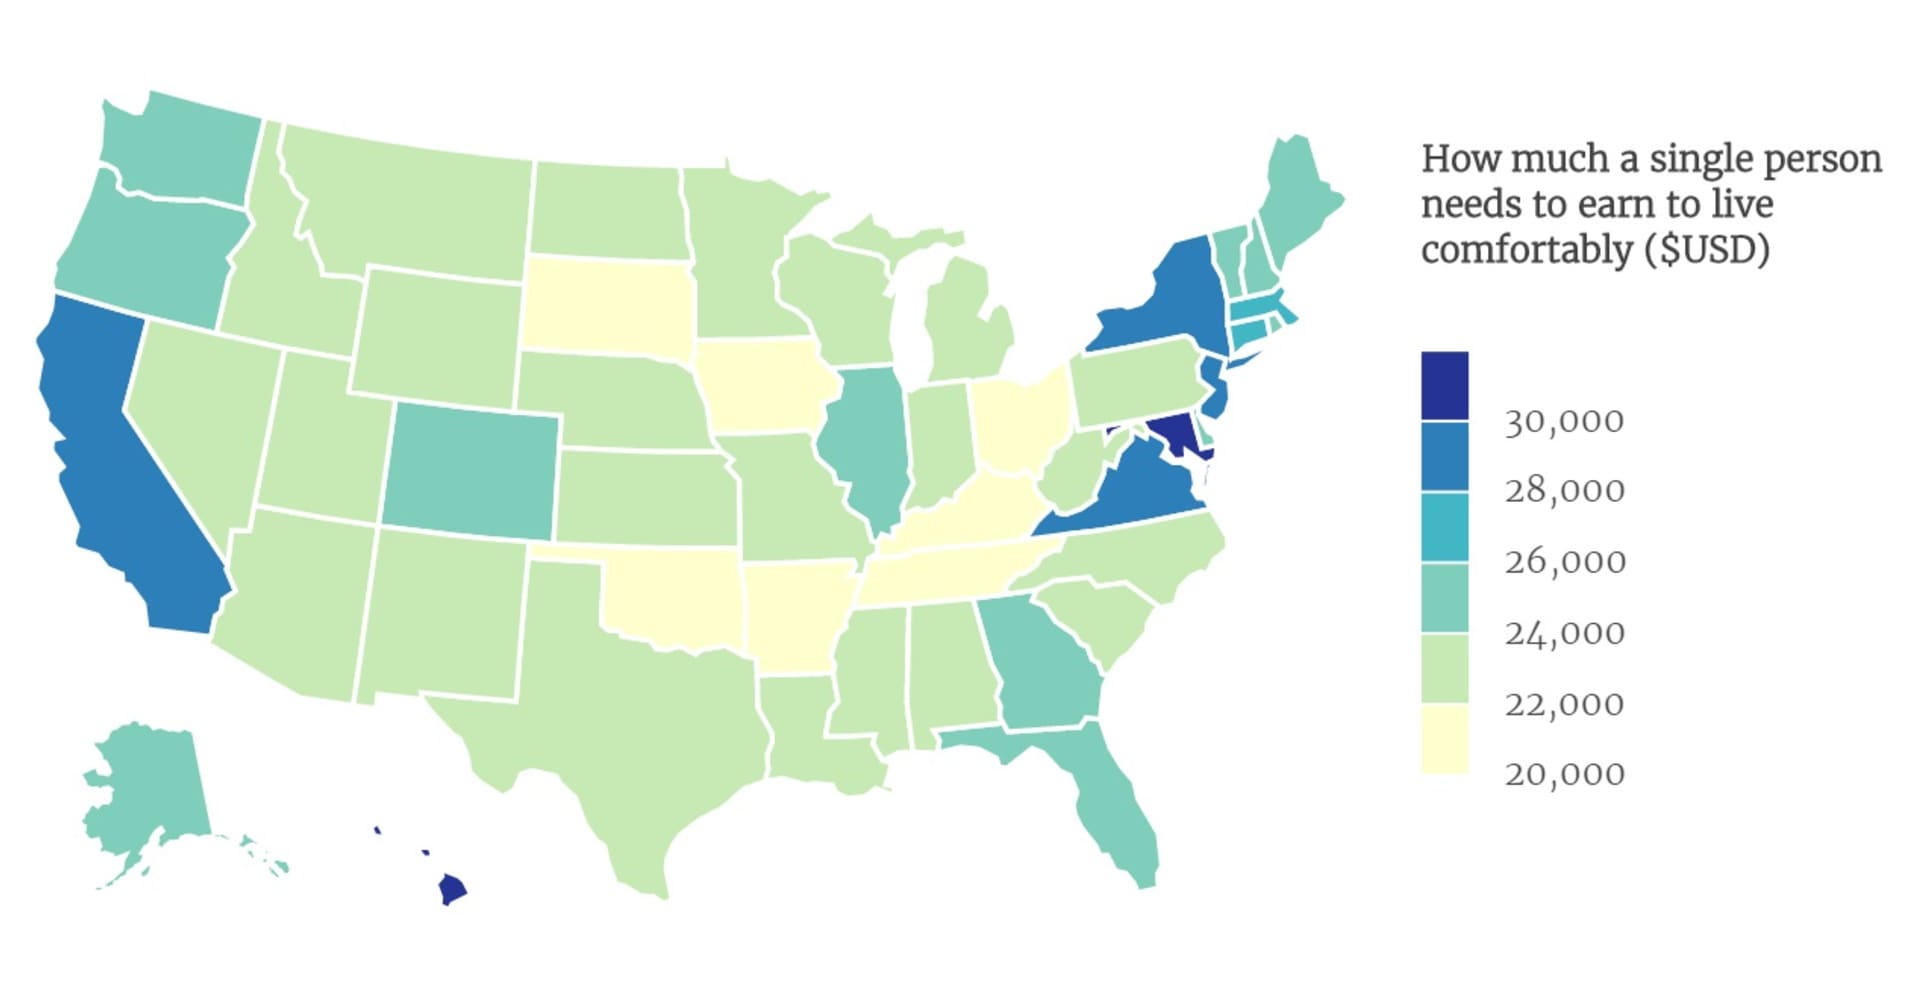 This map shows the living wage for a single person across America